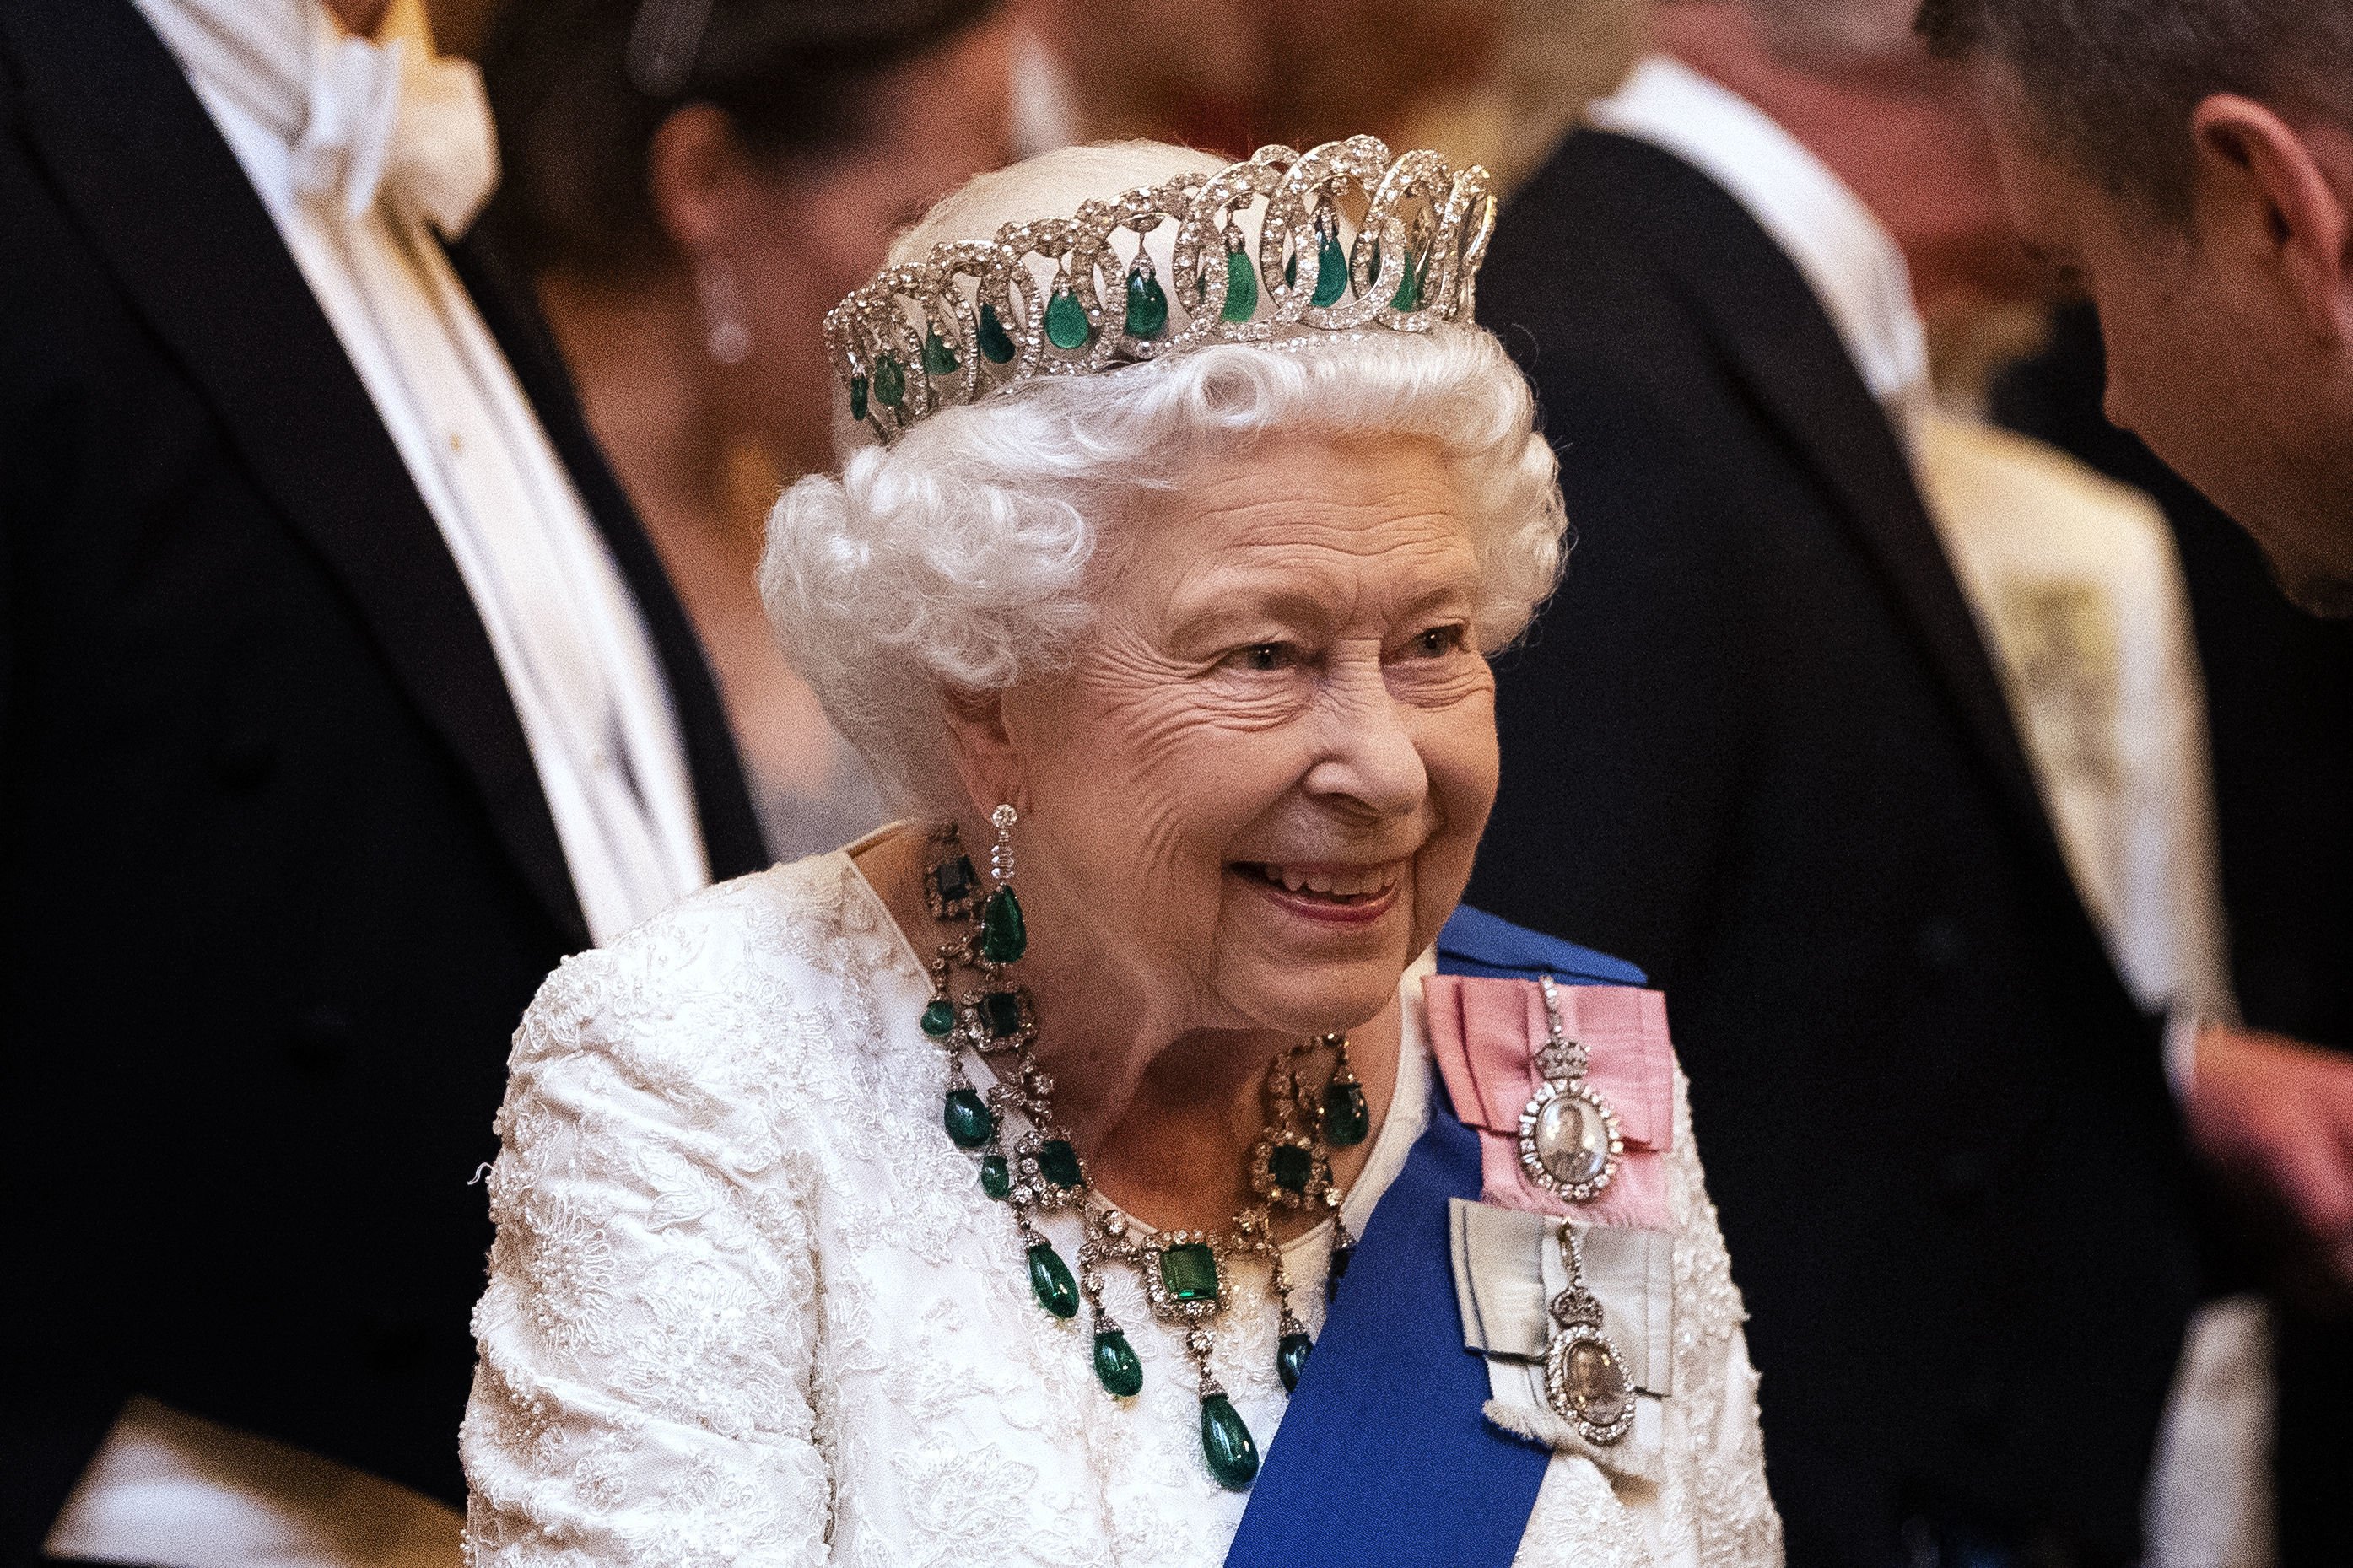 Queen Elizabeth II at an evening reception for members of the Diplomatic Corps at Buckingham Palace on December 11, 2019, in London, England. | Source: Getty Images